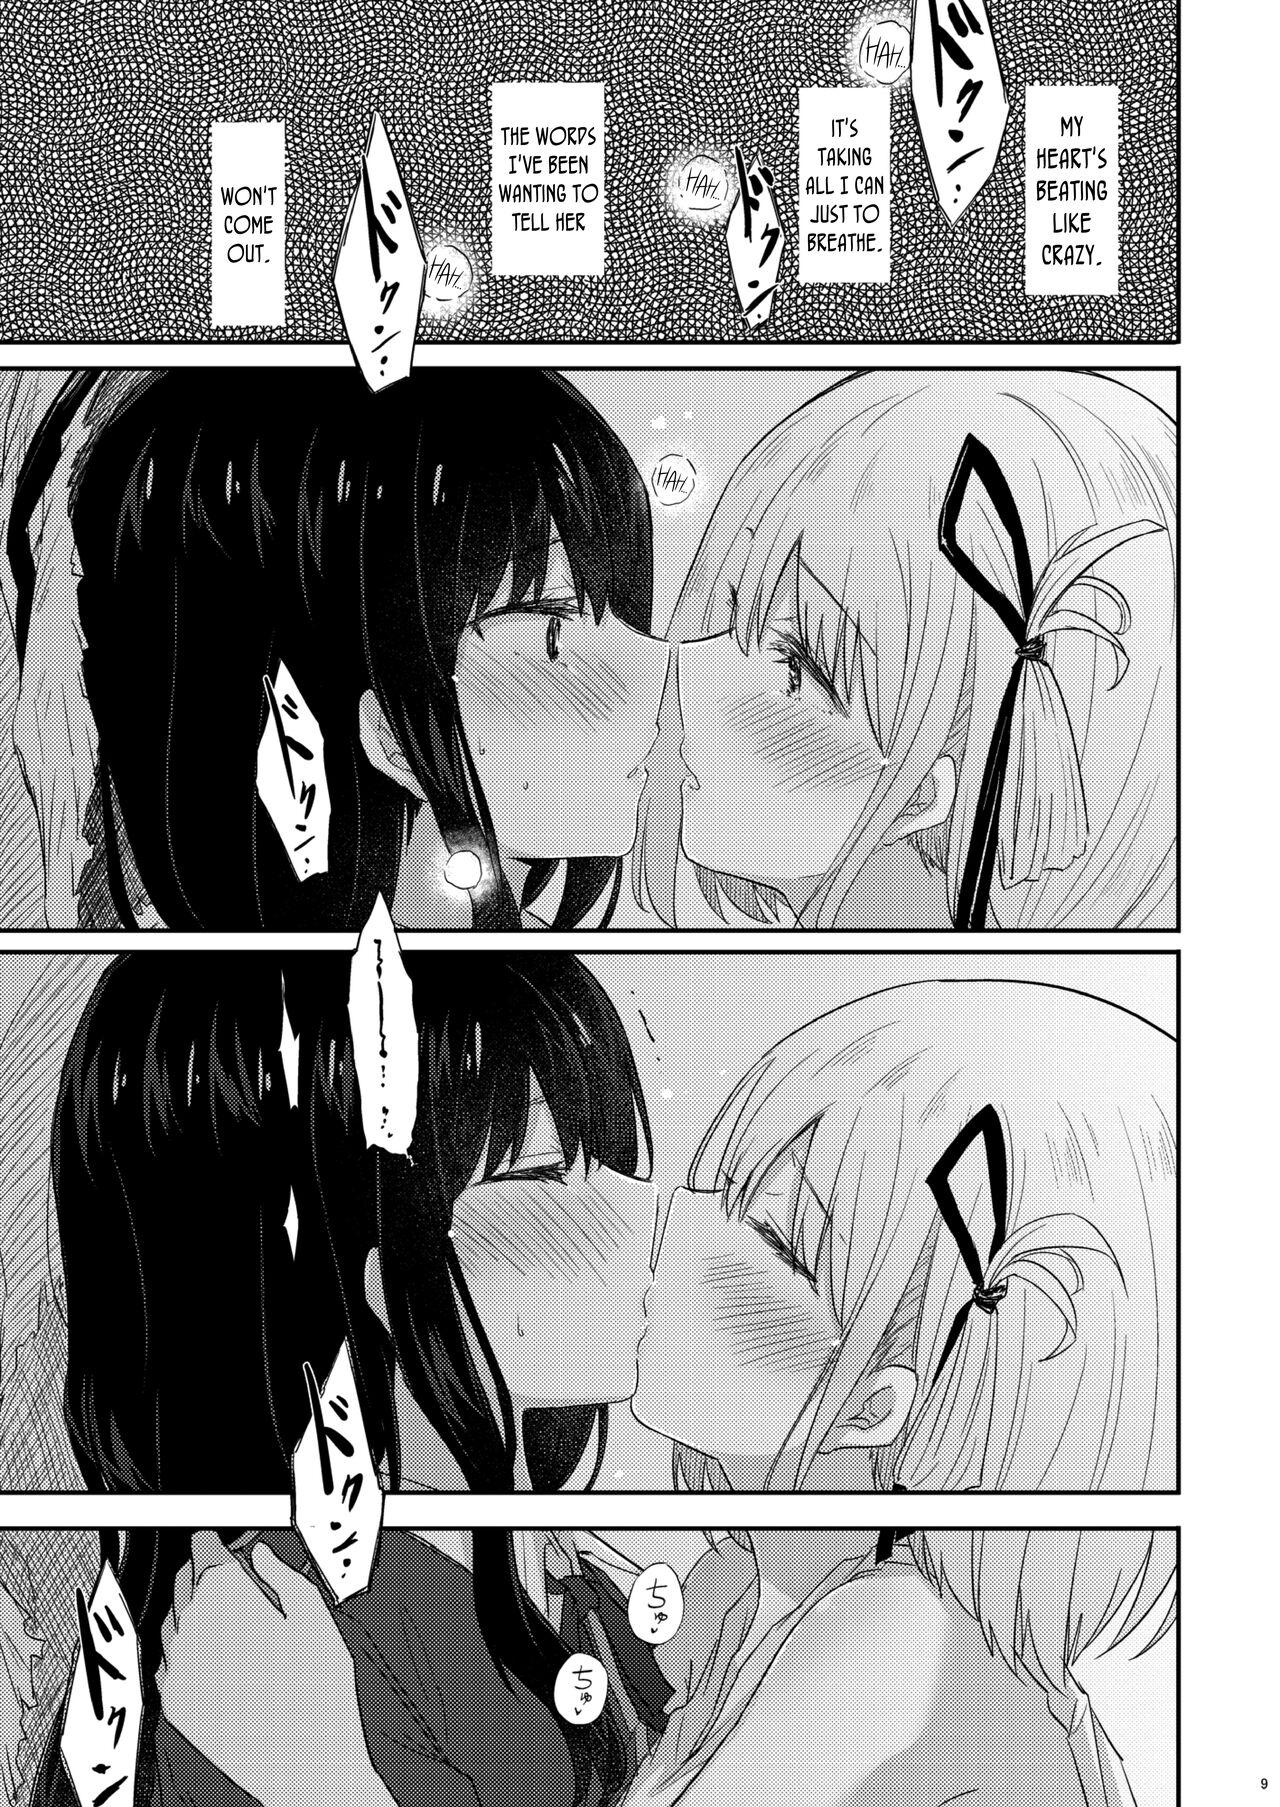 Free 18 Year Old Porn Taion, Kodou | Body Heat, Heart Beat - Lycoris recoil Chibola - Page 8